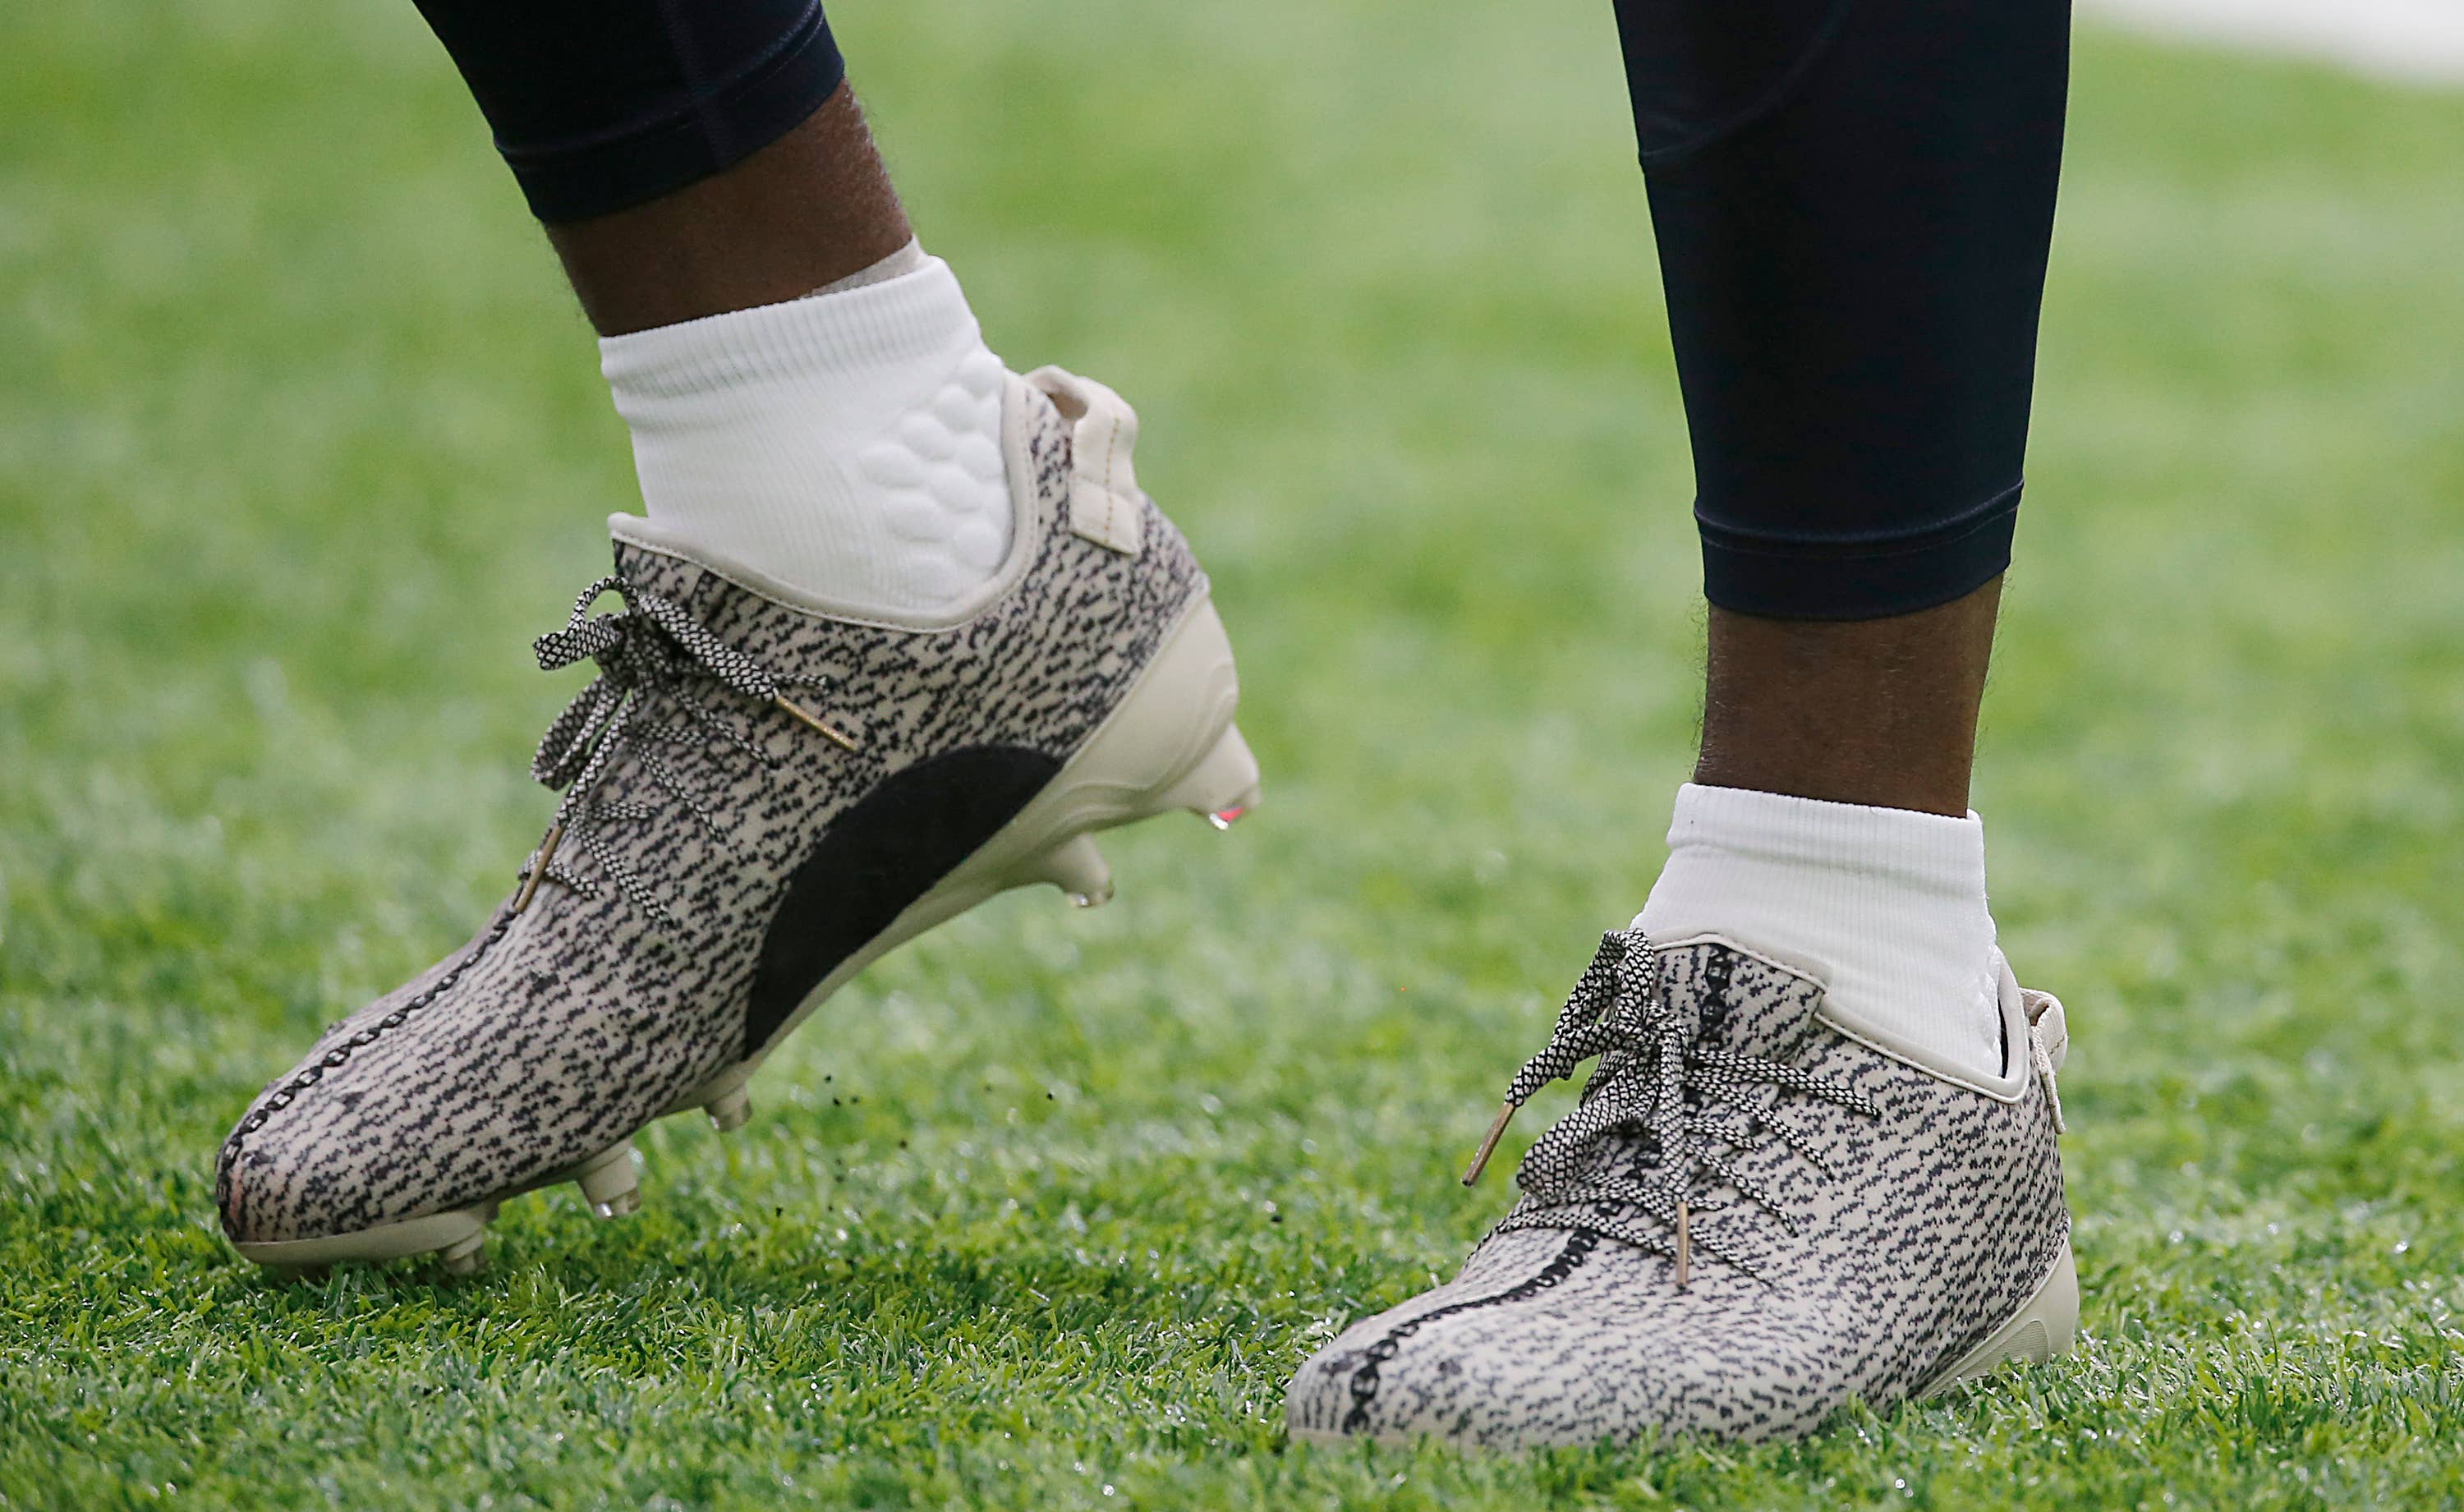 NFL custom cleats are here, so let's figure out what ours would